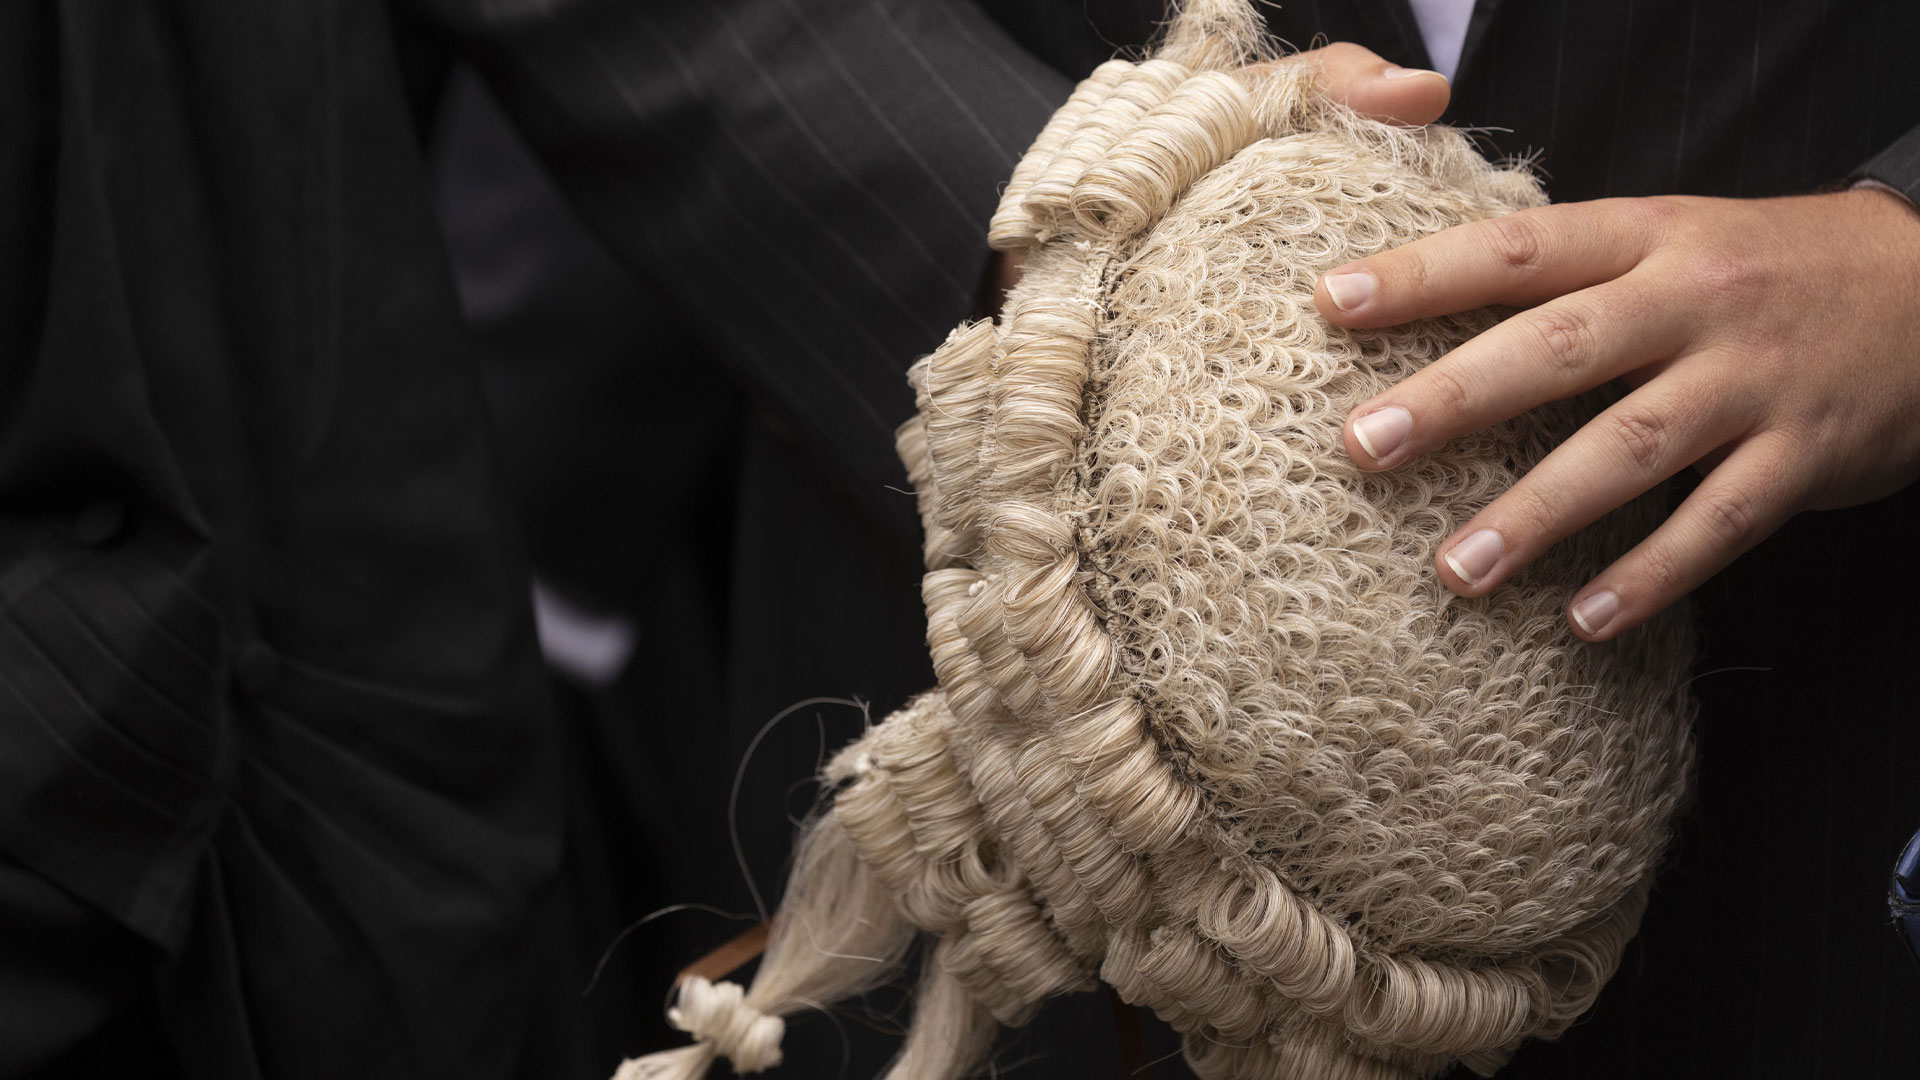 Solicitor holding a wig at their bad admission ceremony.